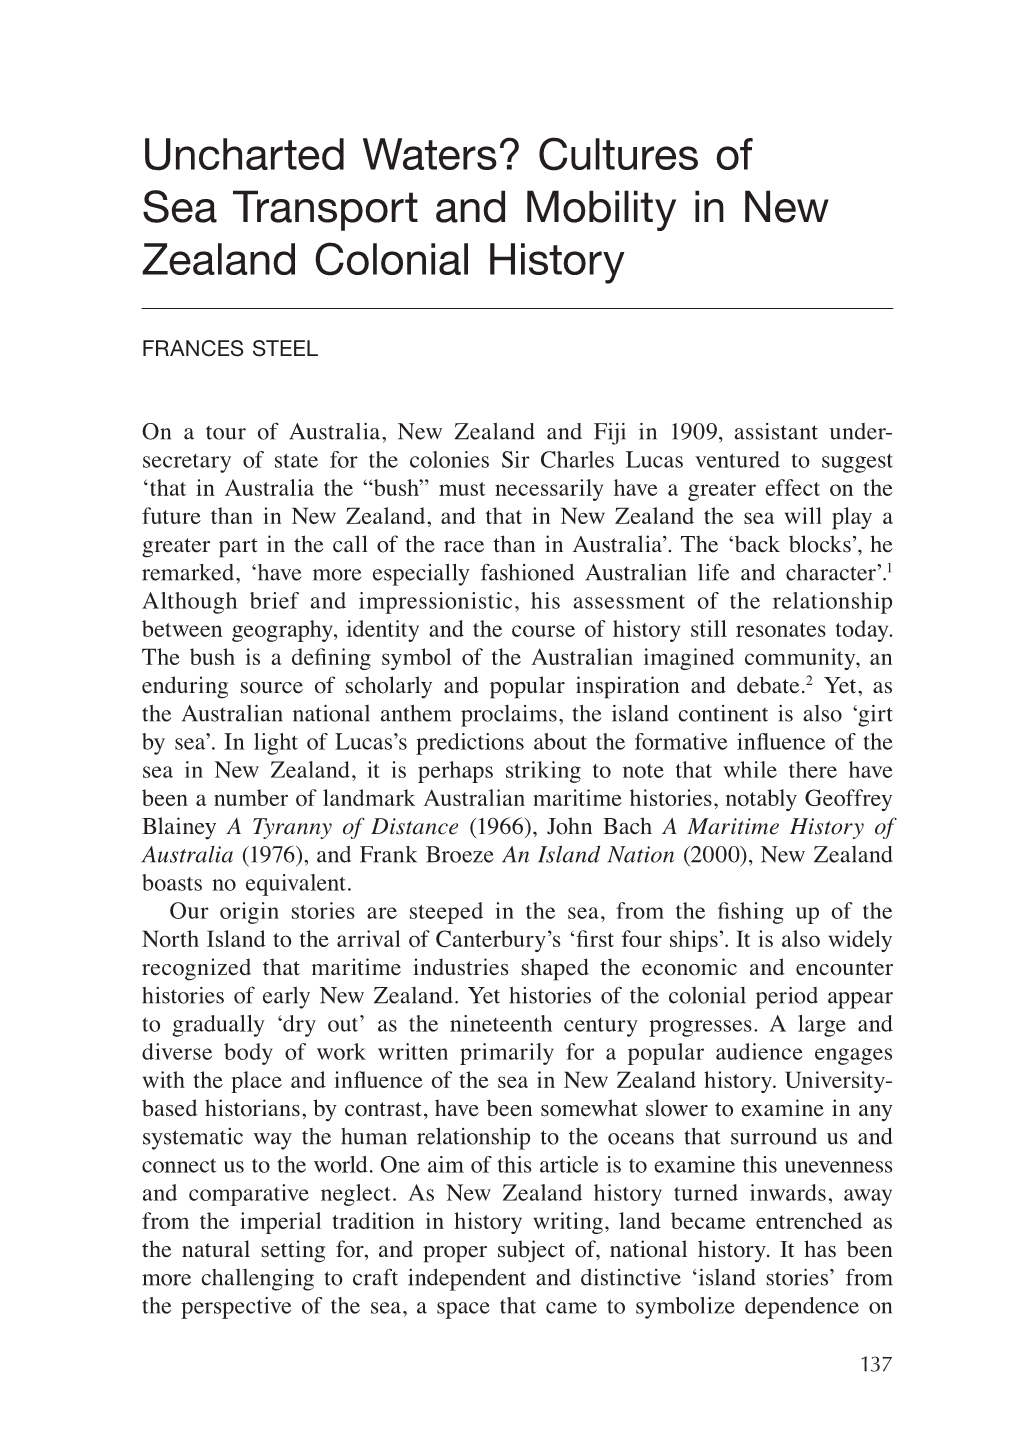 Cultures of Sea Transport and Mobility in New Zealand Colonial History